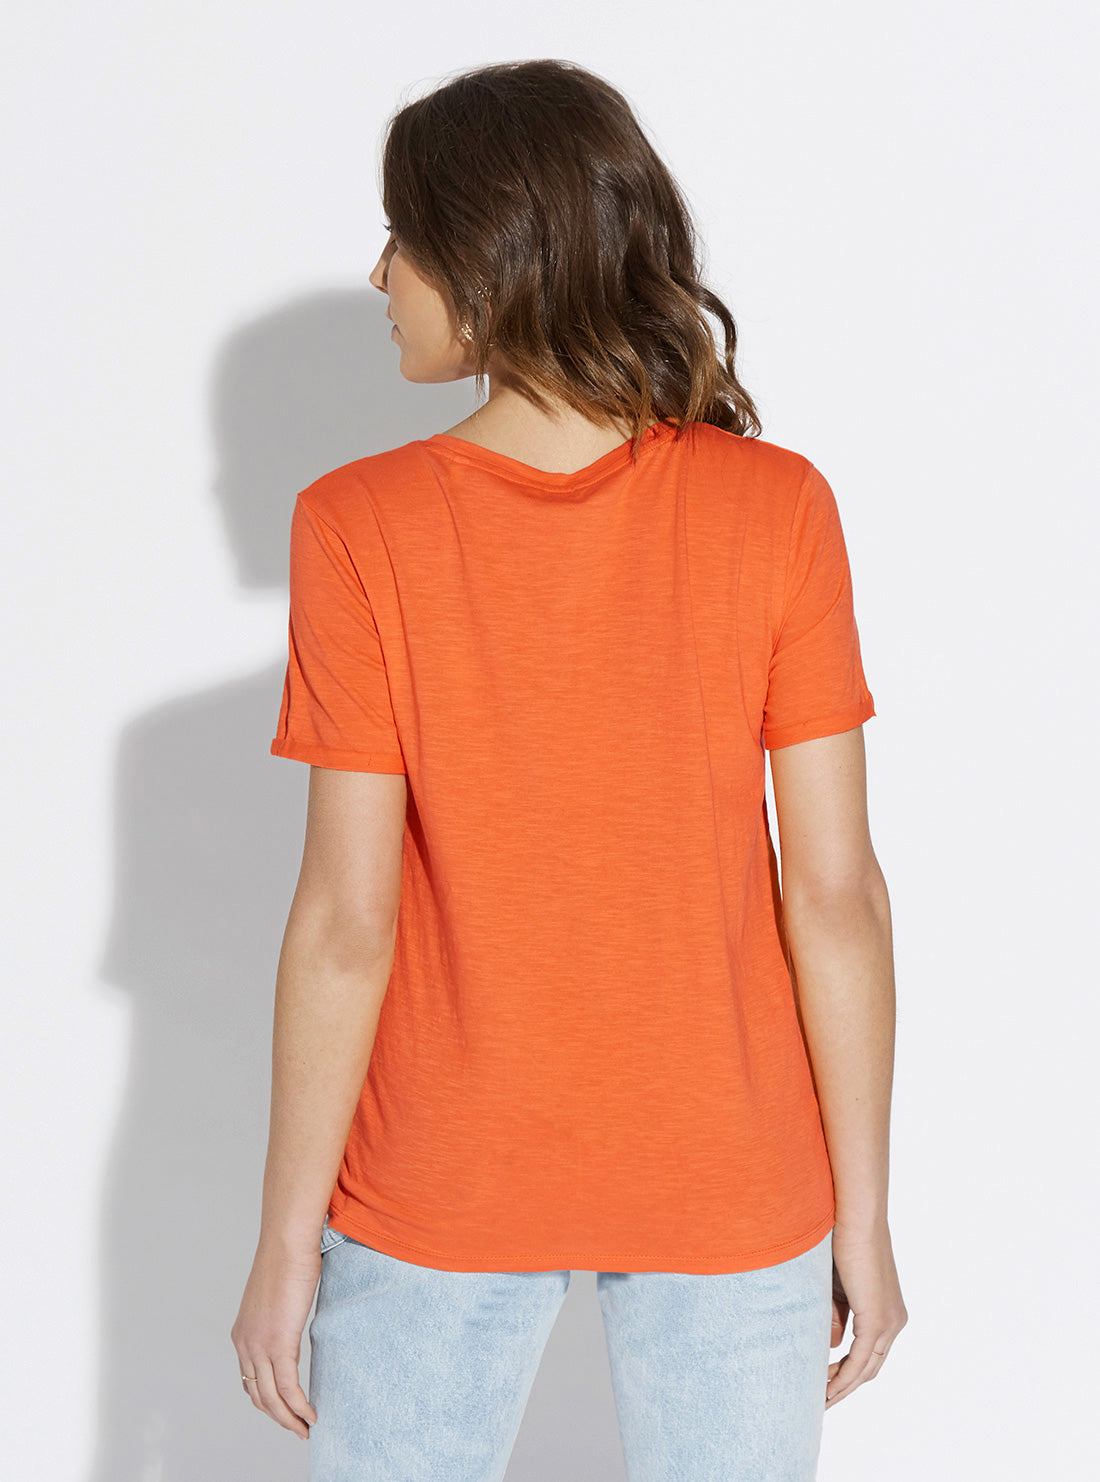 GUESS Womens Eco Orange Short Sleeve GUESS 1981 Rolled Cuff T-Shirt W0GI69R8G01 Back View